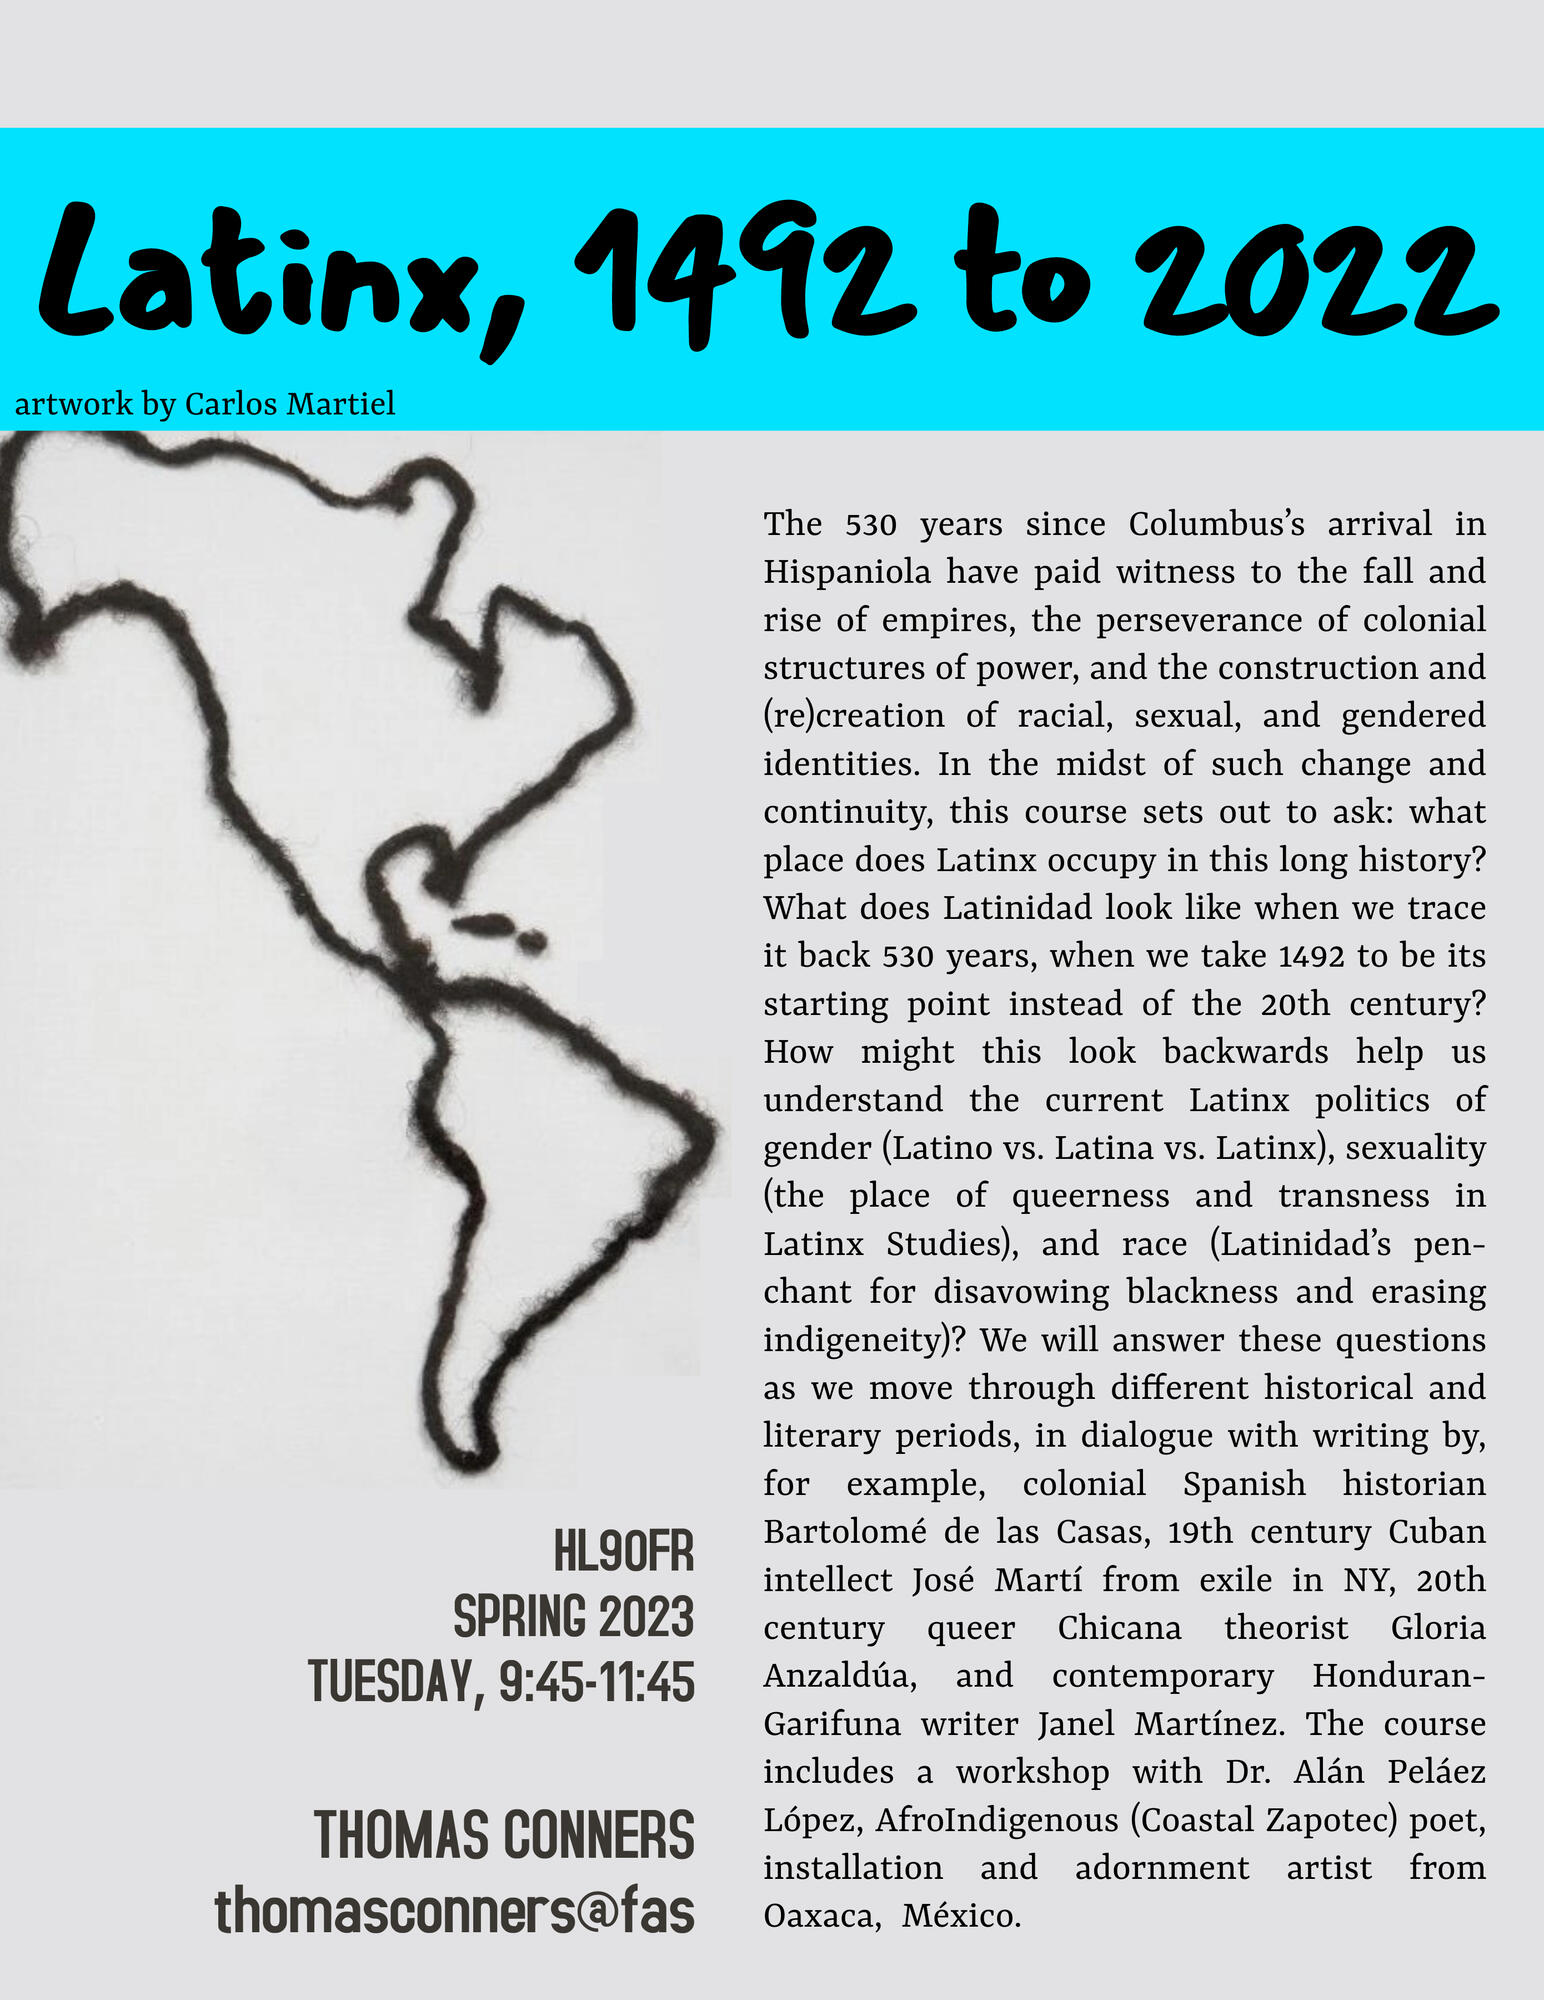 Latinx from 1492 to 2022